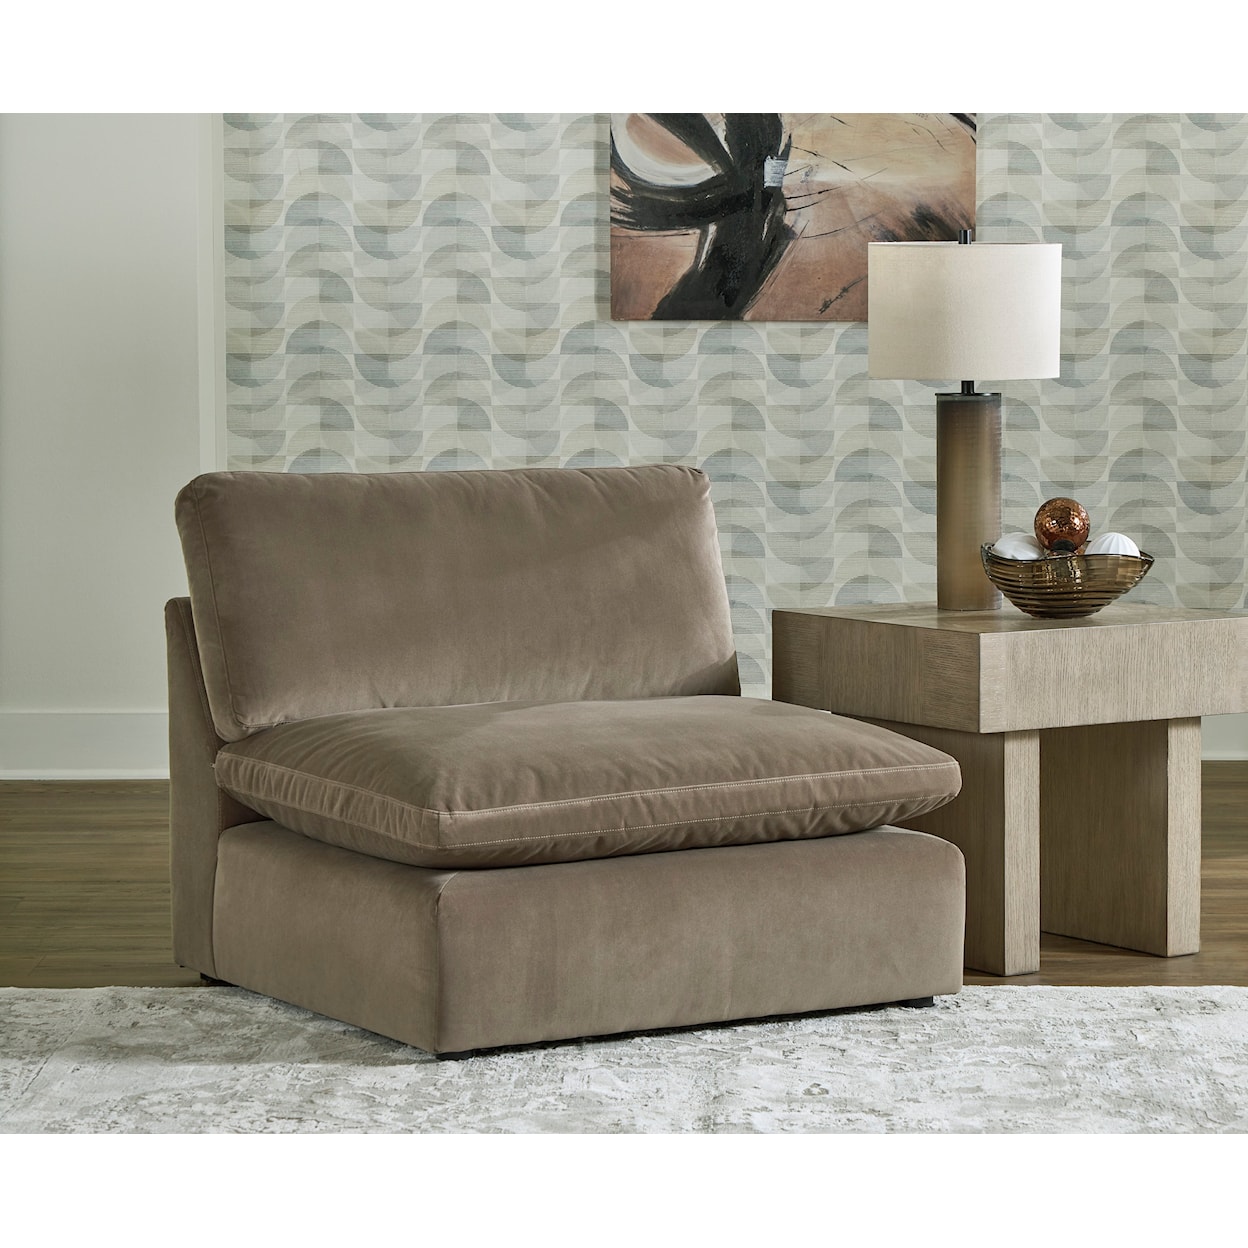 Ashley Furniture Signature Design Sophie Armless Chair